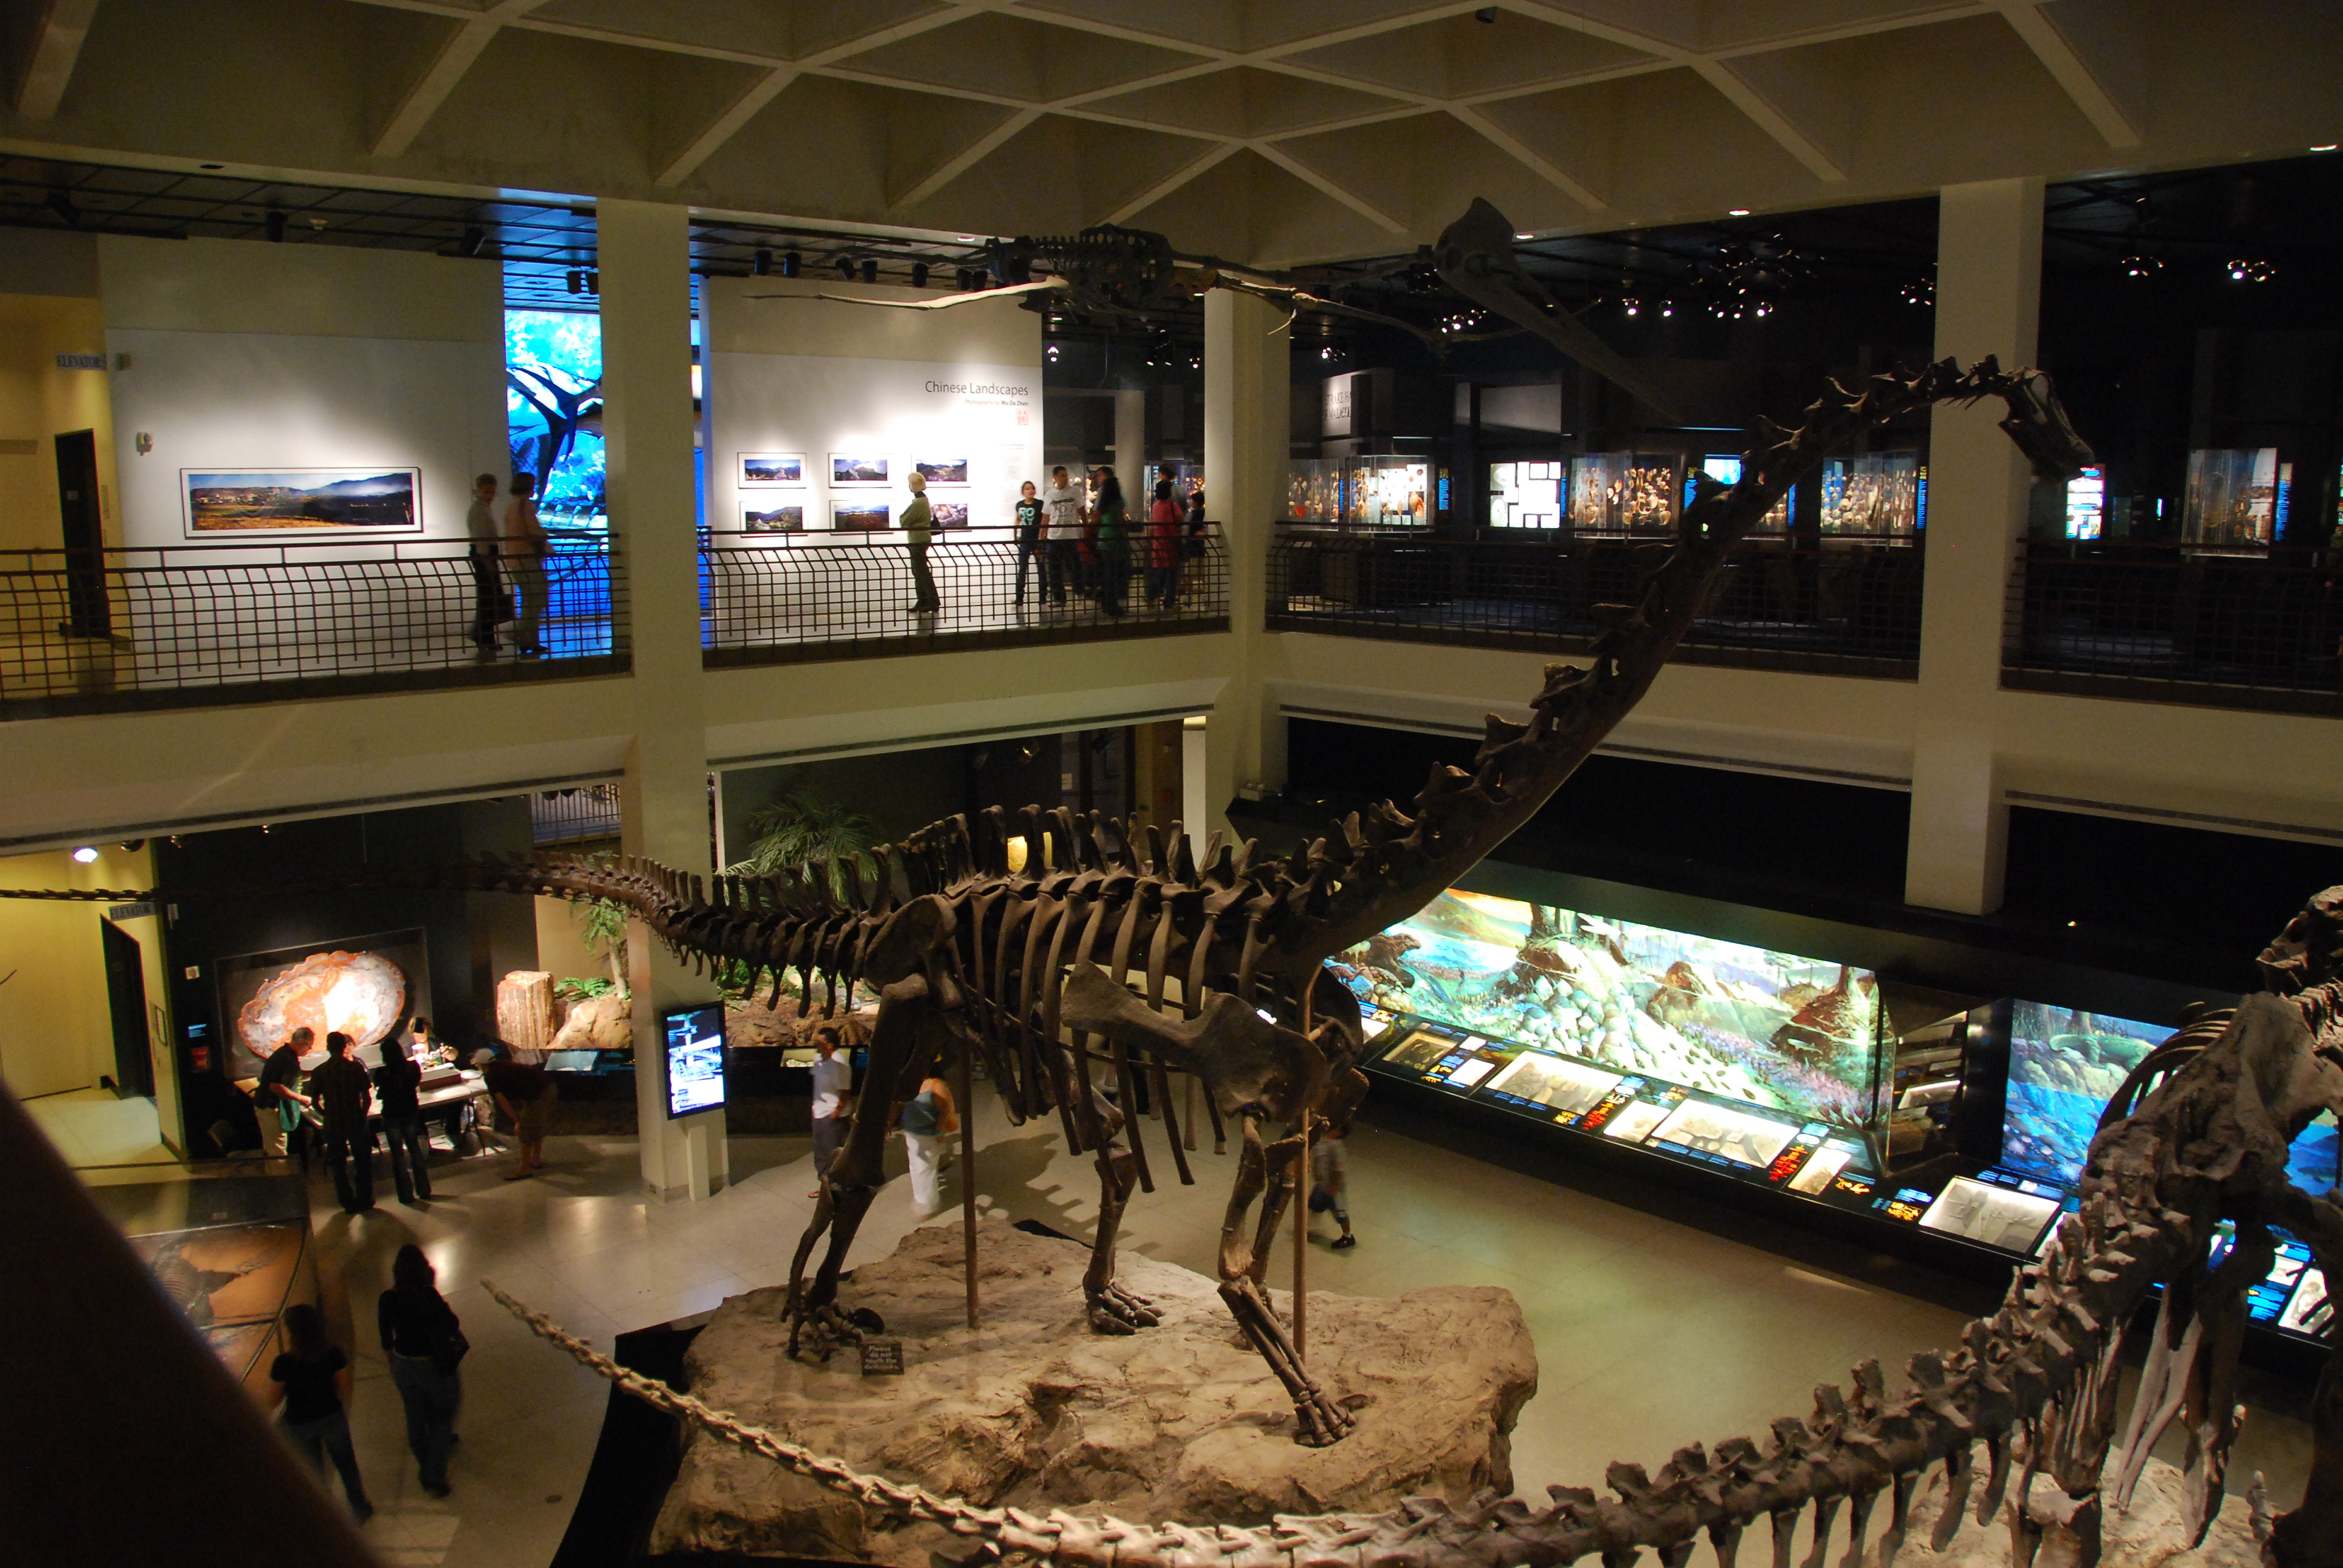 The Houston Museum of Natural Science